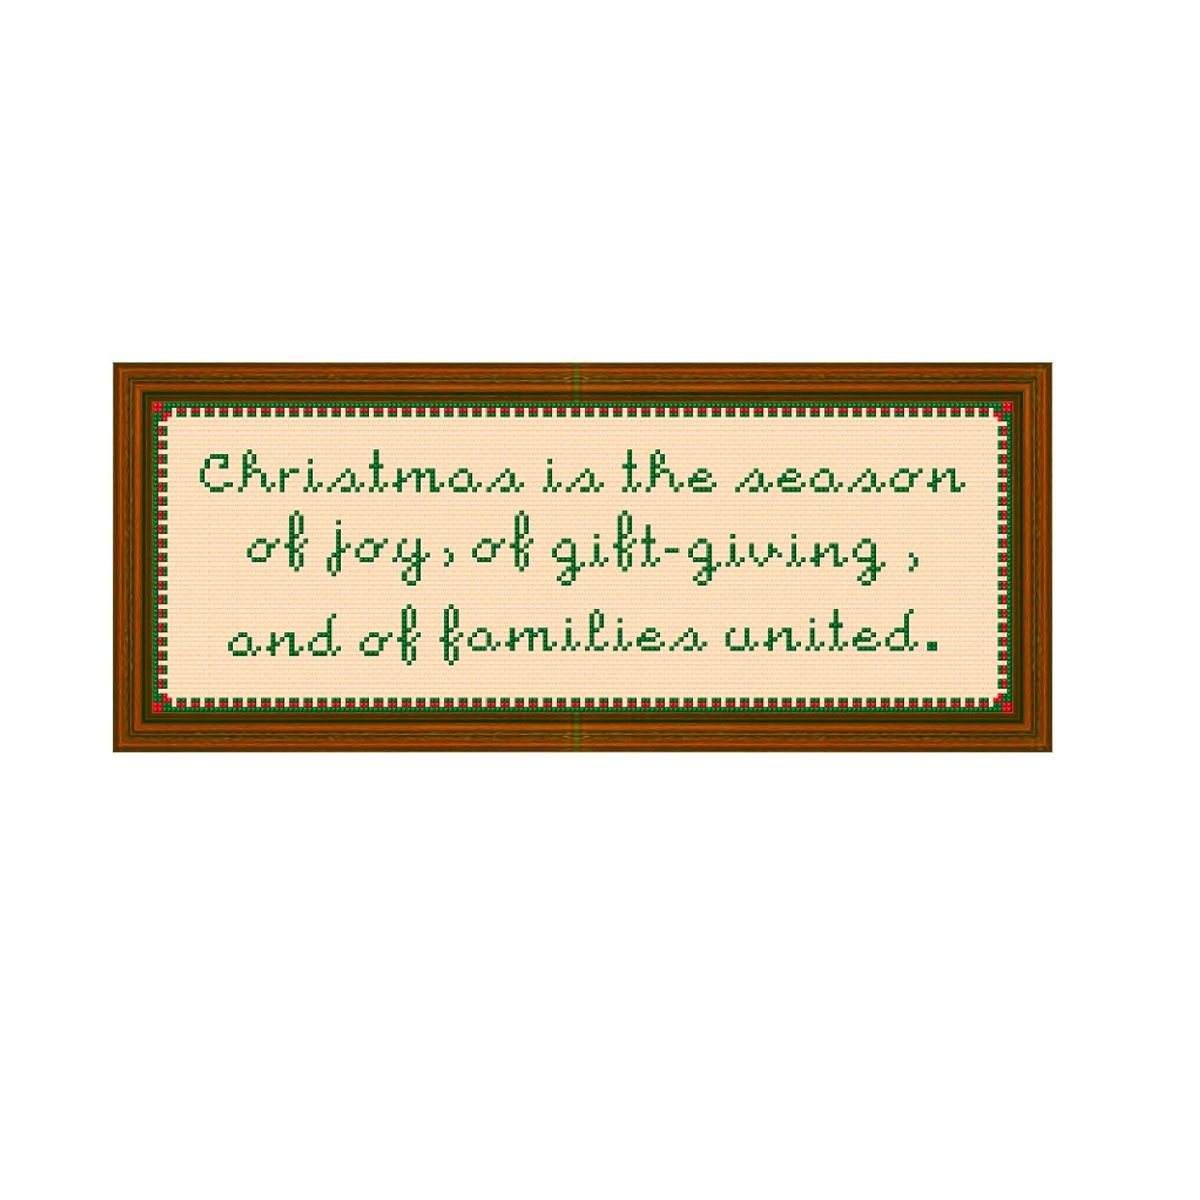 Christmas Quote Cross Stitch Pattern Winter Snowflakes Instant Pdf Chart 2 Sampler Potrait Greeting Card Download Counted Beginner tuppu.net/42388742 #Etsy #Crossstitchfurnish #SamplerPattern